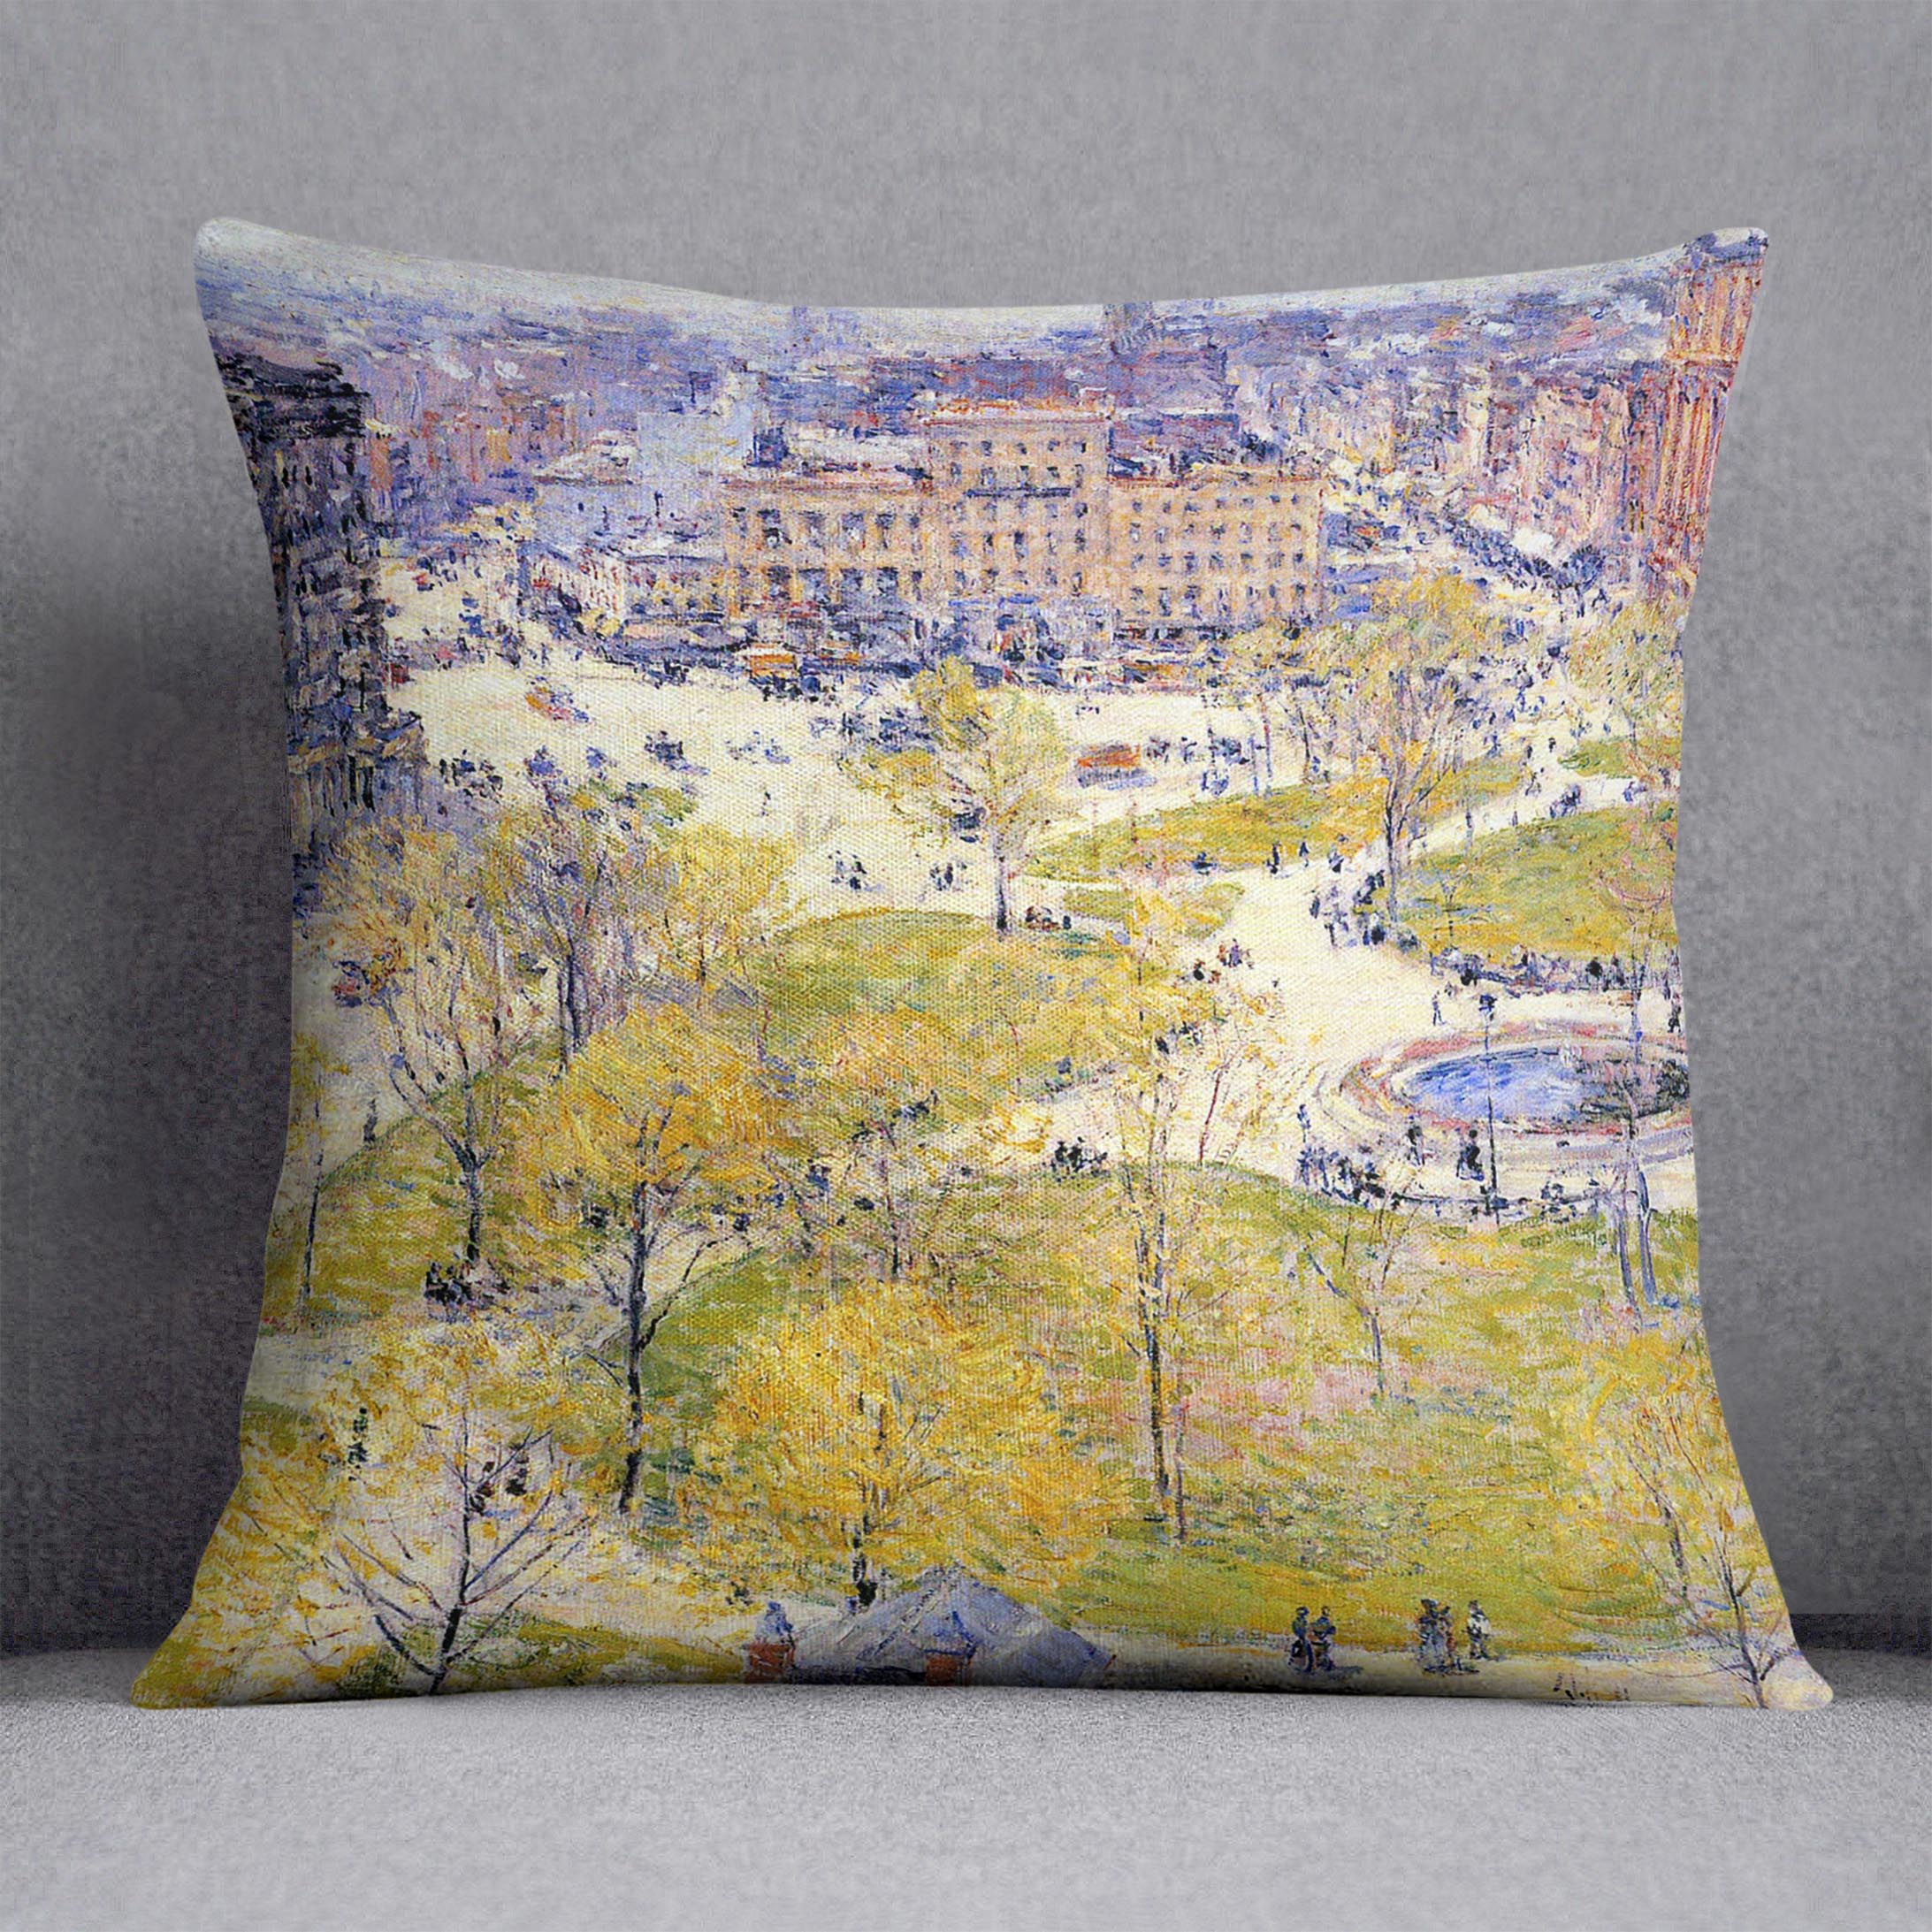 Union Square in Spring by Hassam Cushion - Canvas Art Rocks - 1